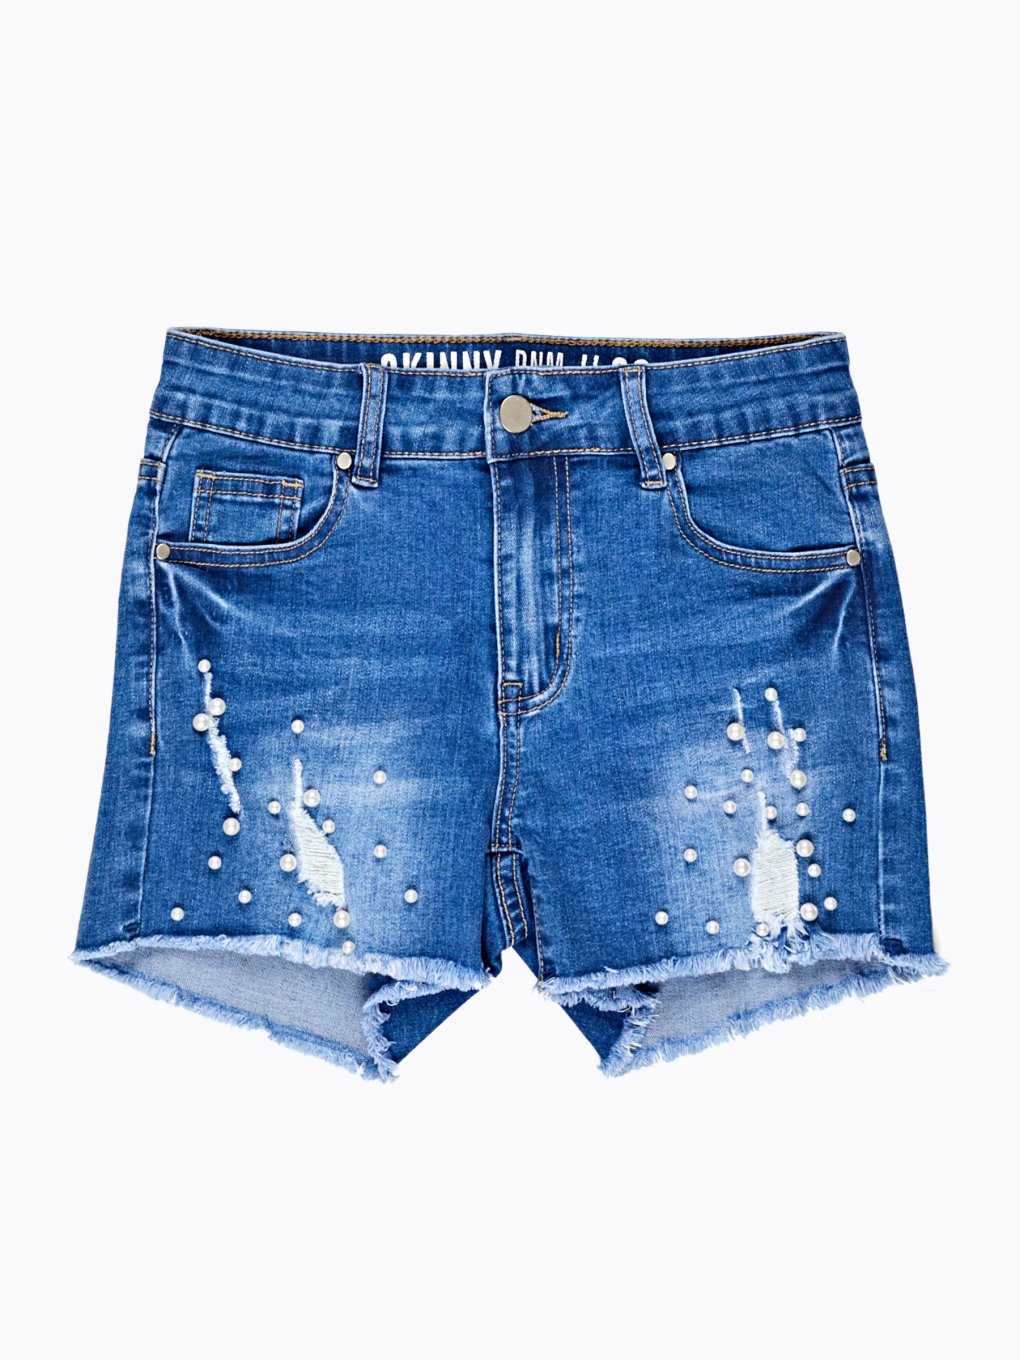 Denim shorts with pears